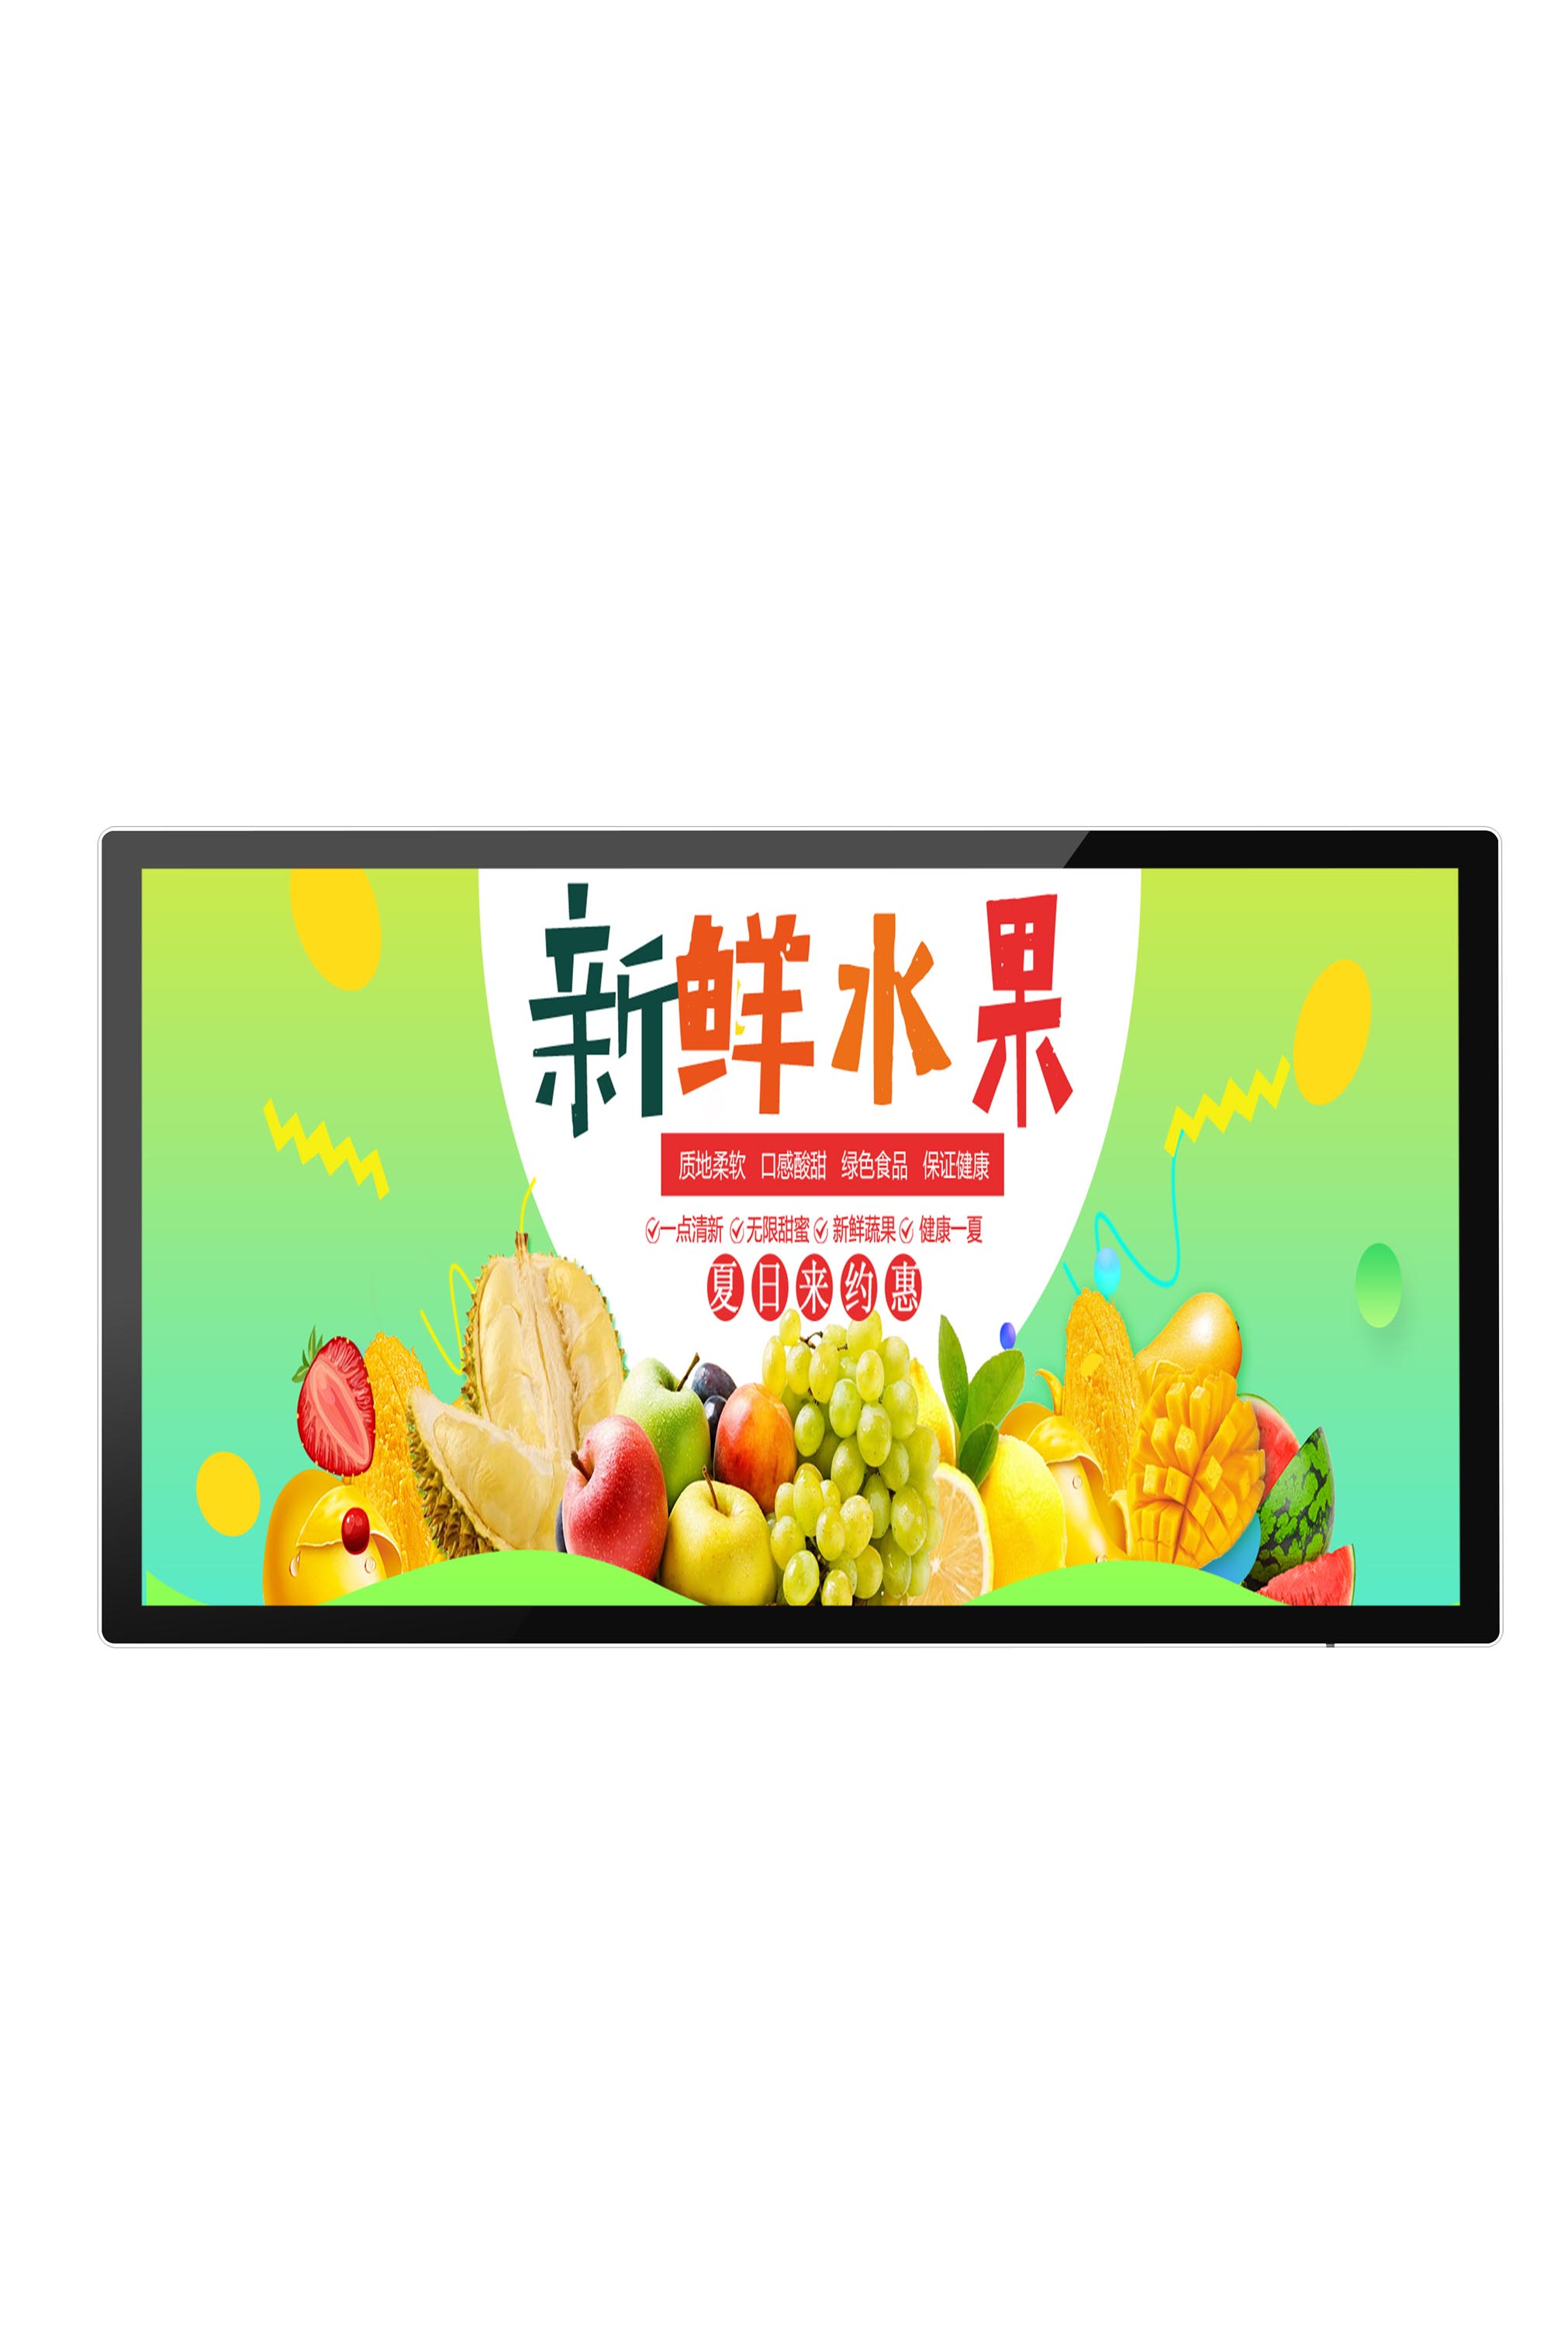 Wall Mount Touch Digital Signage